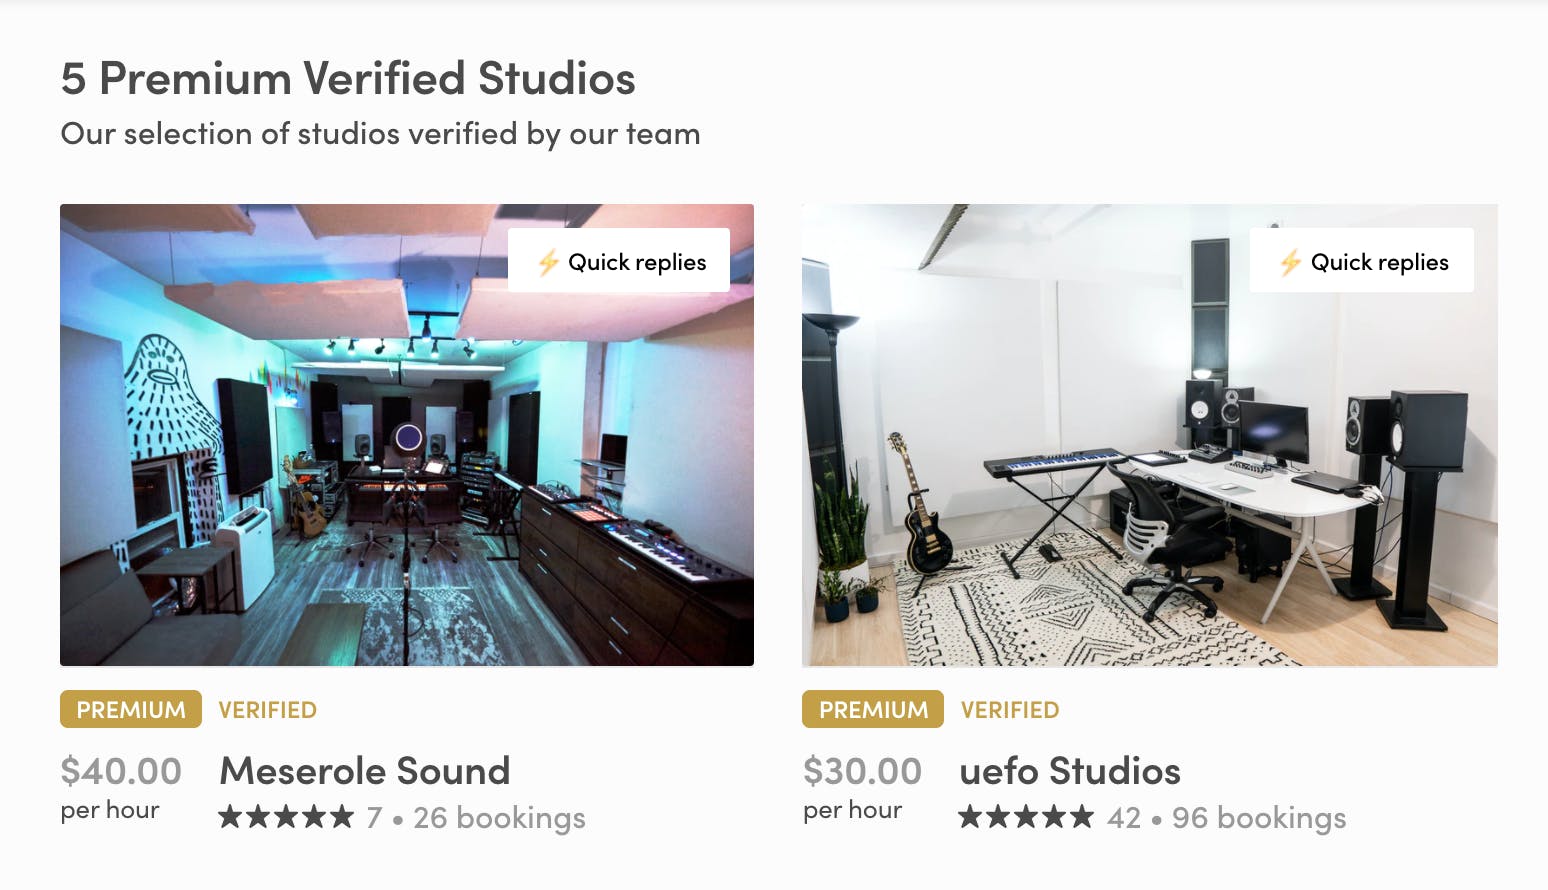 Screenshot from Studiotime marketplace showing the images and five-star ratings of two verified listings.